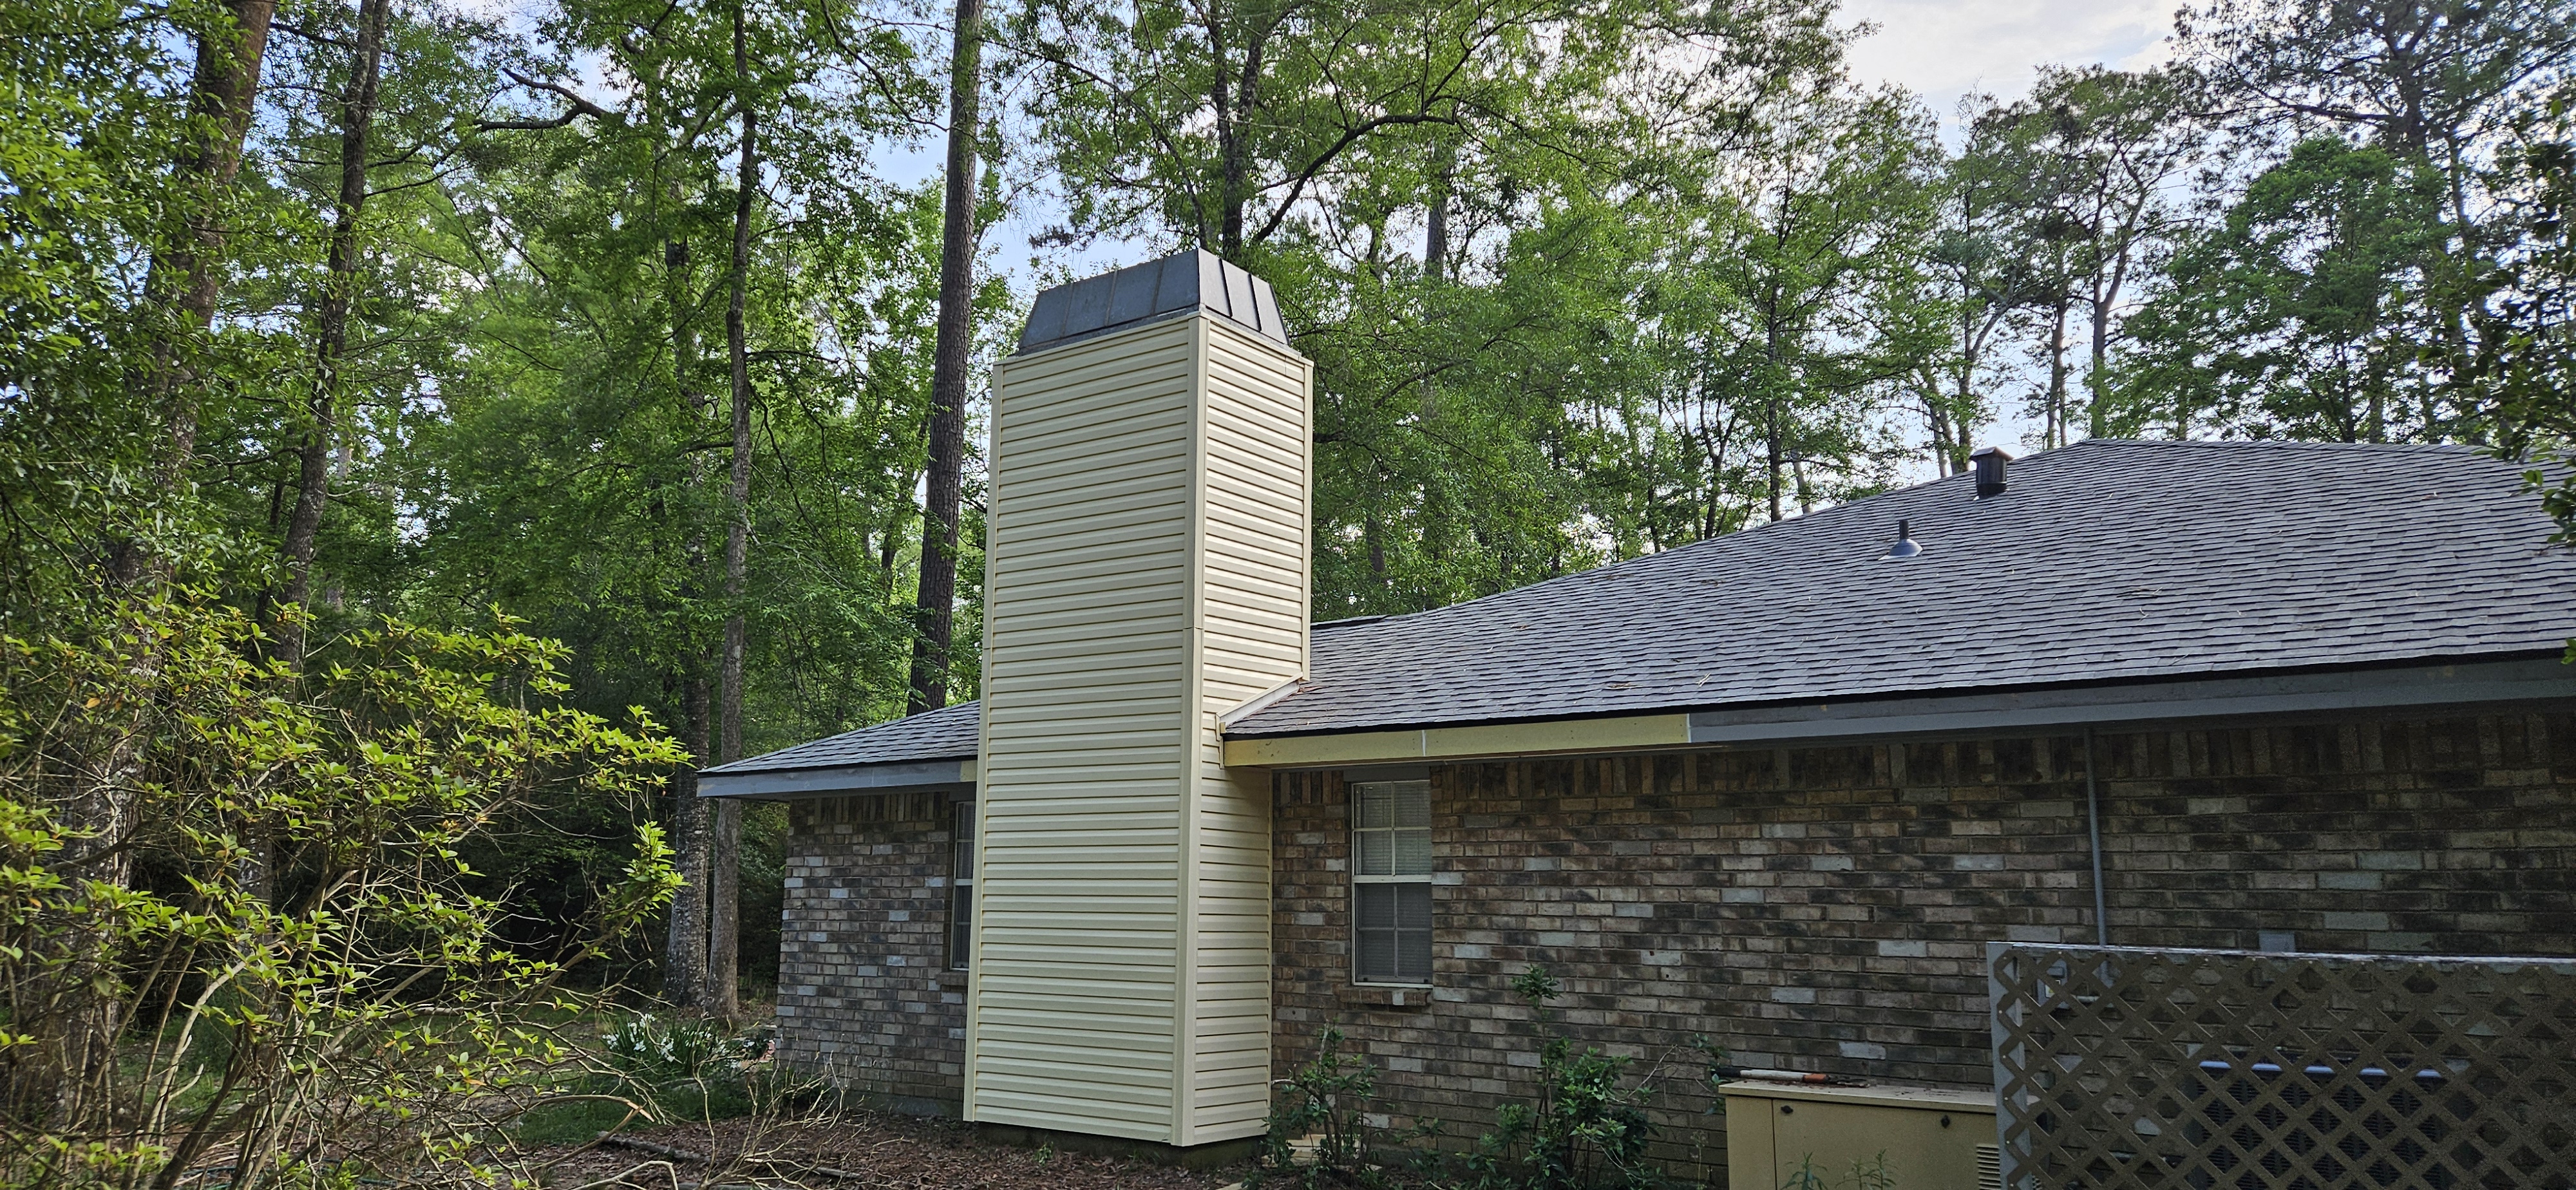 Revamp Your St. Tammany Parish Home's Curb Appeal with Durable Vinyl Siding! Thumbnail